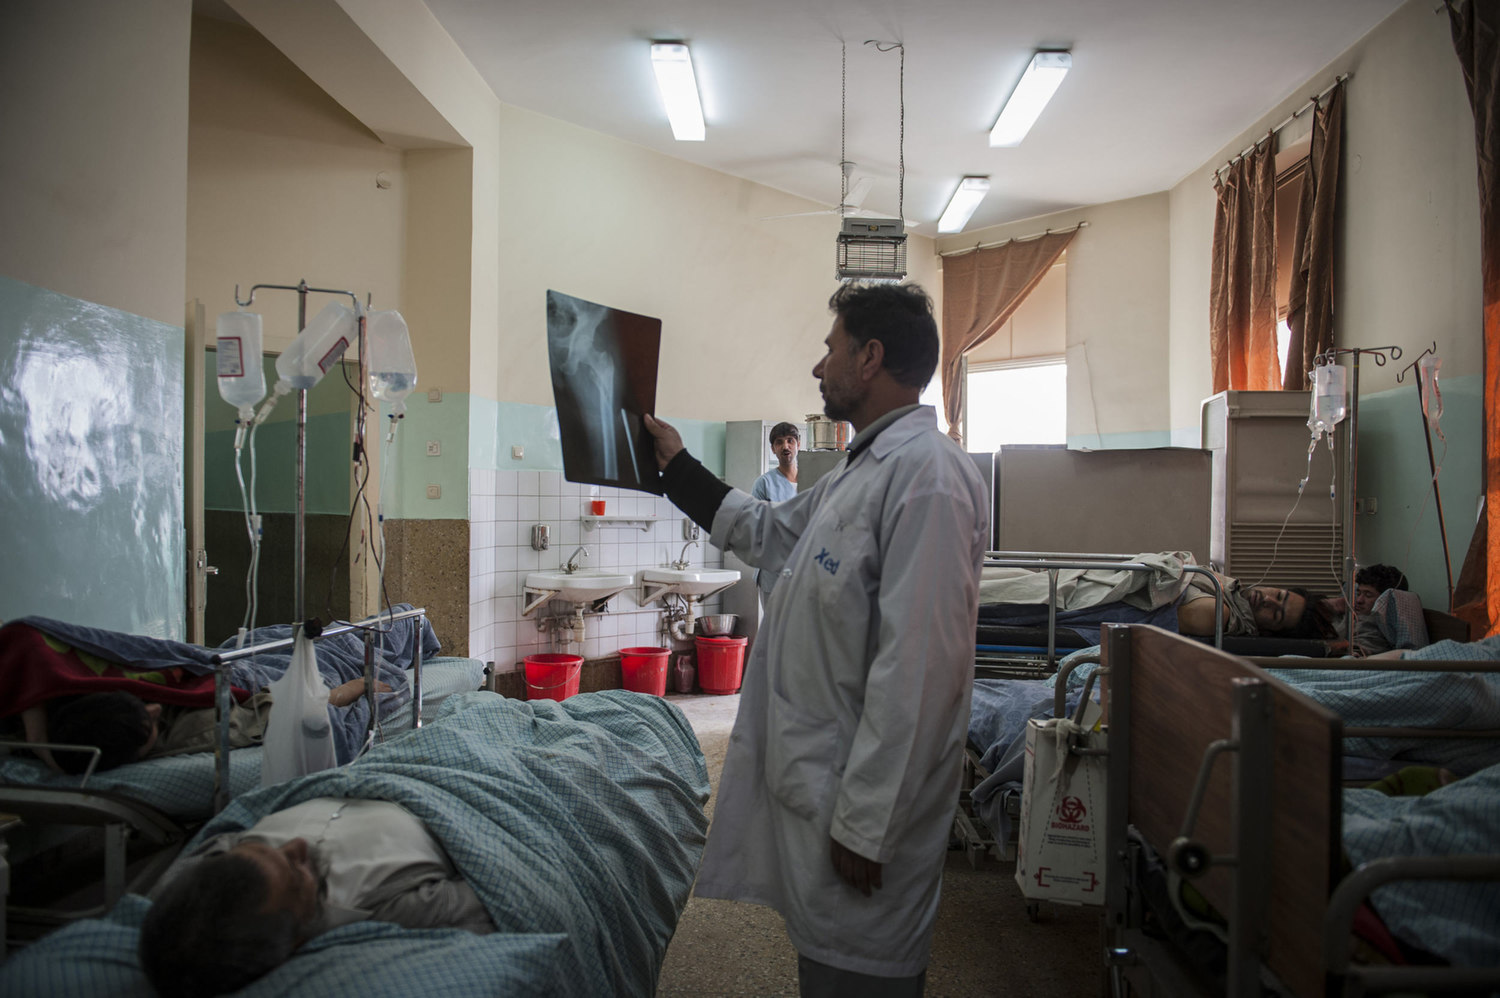  Dr.Younis examines a patients x-ray in the mens orthopedic ward at Wazir Akbar Khan Public Hospital in Kabul Afghanistan. Some hospital rooms hold up to 25 patients, using all available space. Many patients also rest in the hallway. 